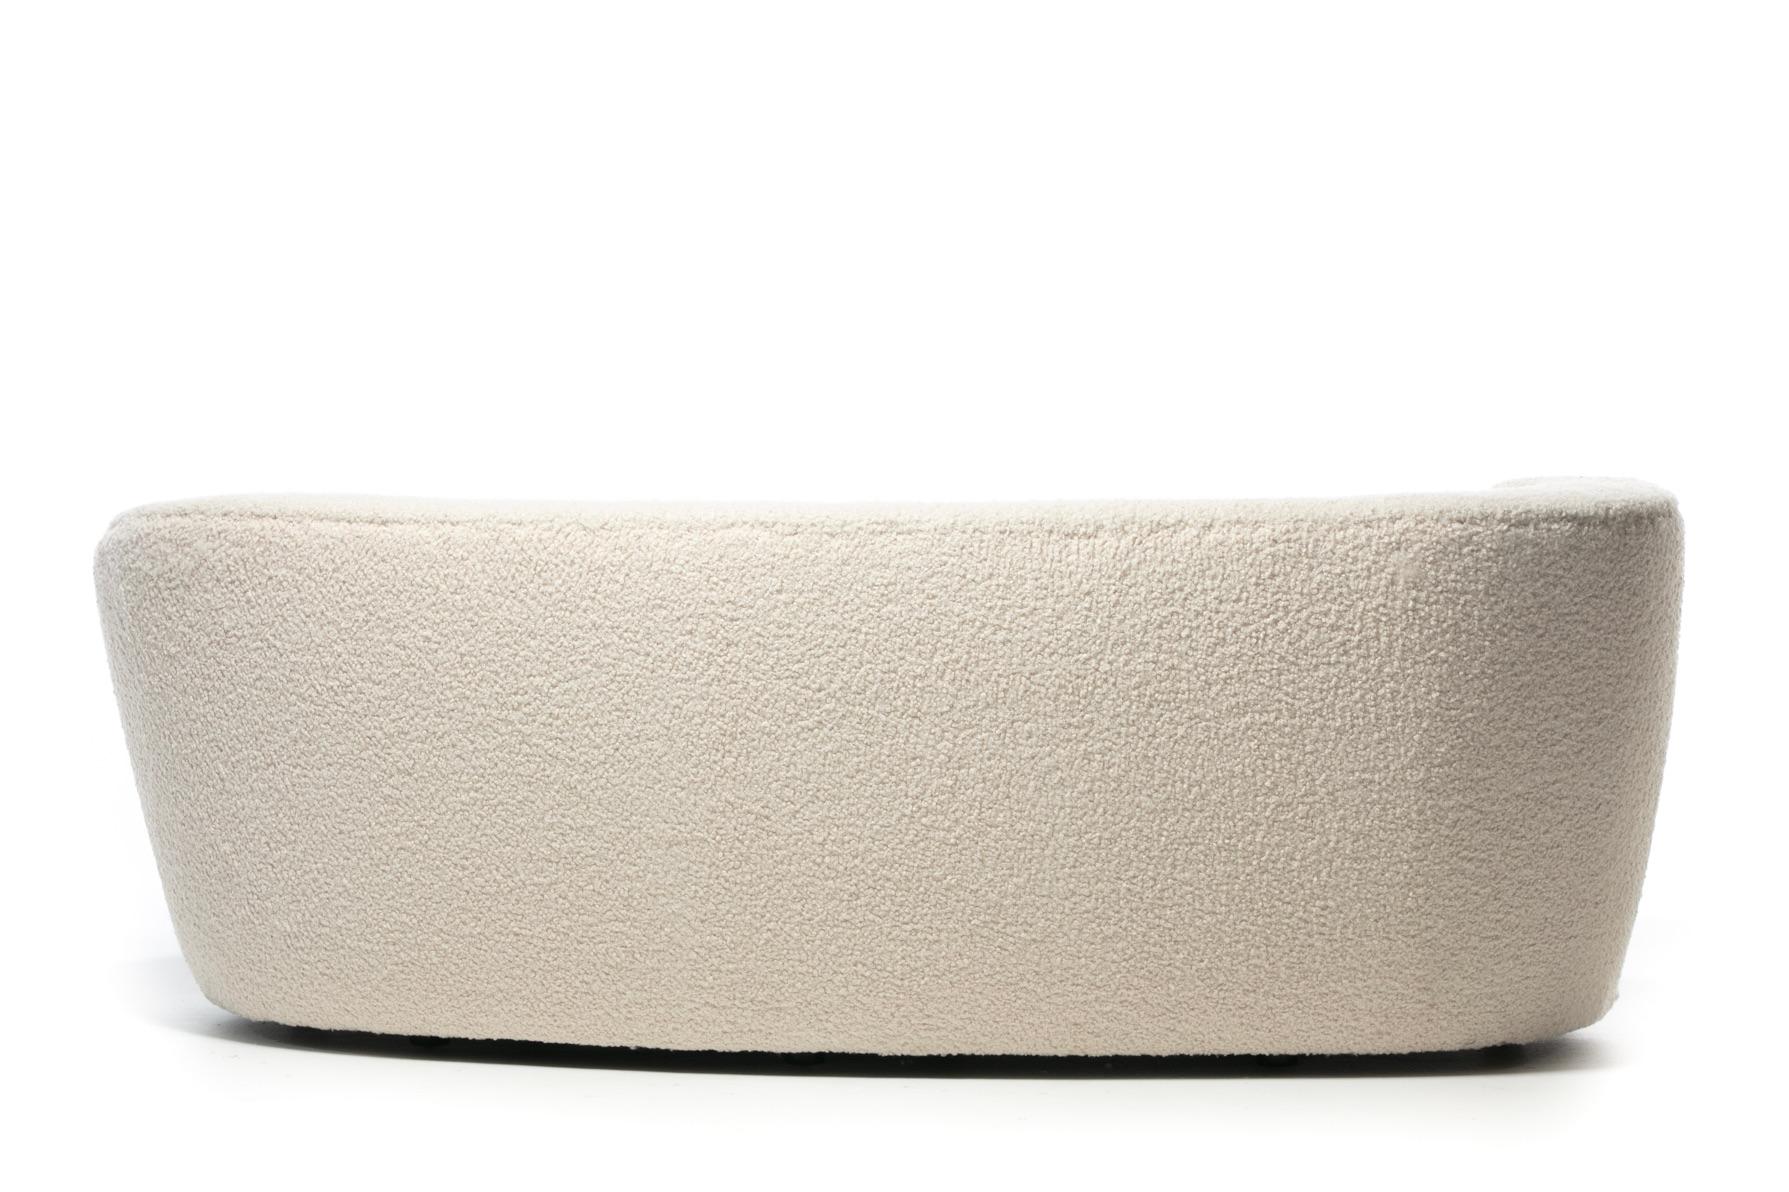 Vladimir Kagan Nautilus Sofa in Ivory White Bouclé by Directional, c. 1990 For Sale 4